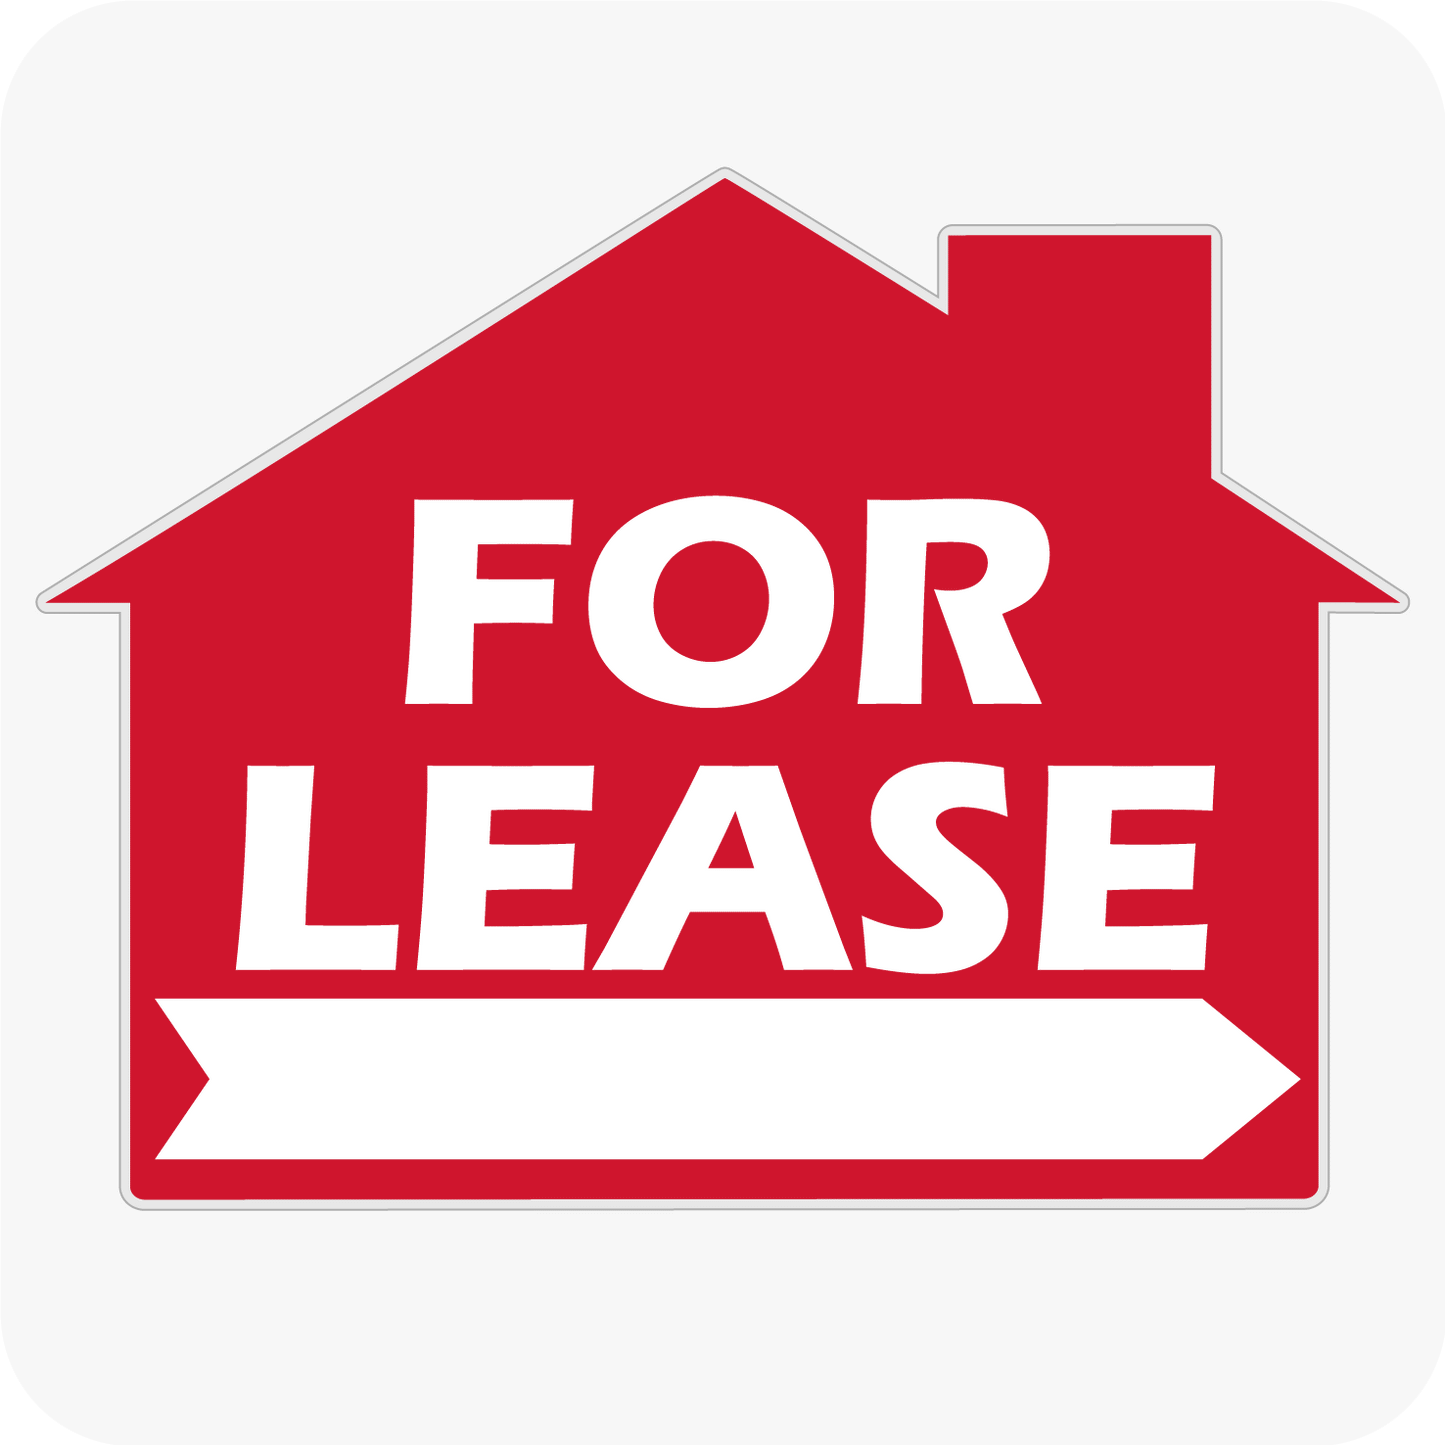 For Lease - House Shaped Sign 18x24 - Red